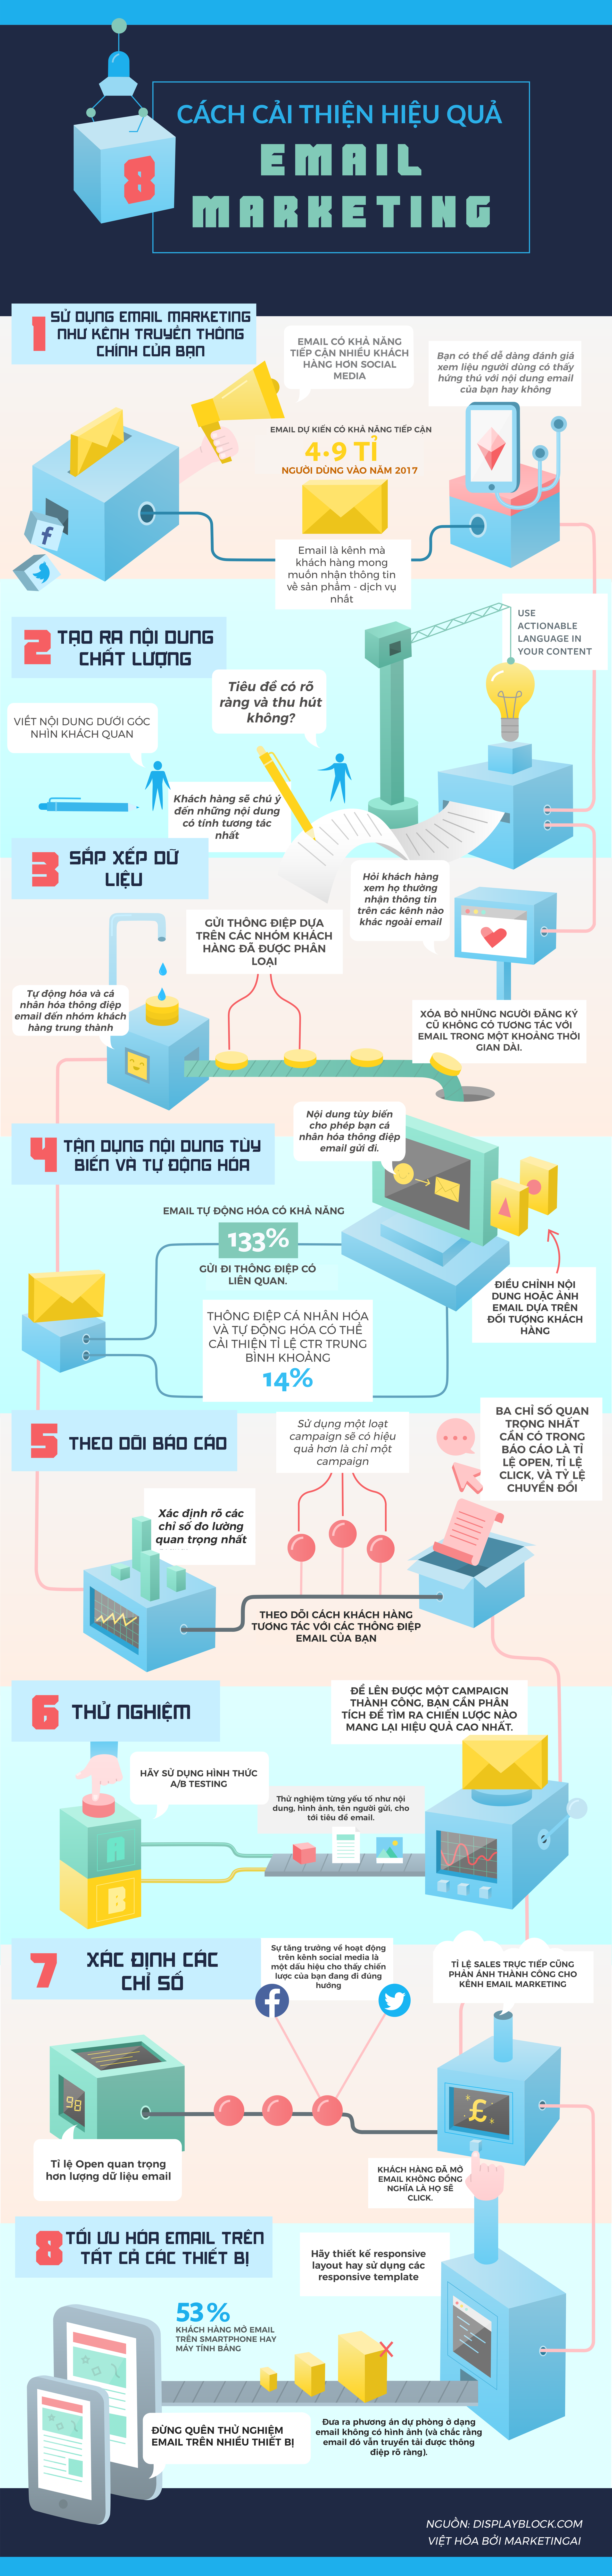 infographic email marketing